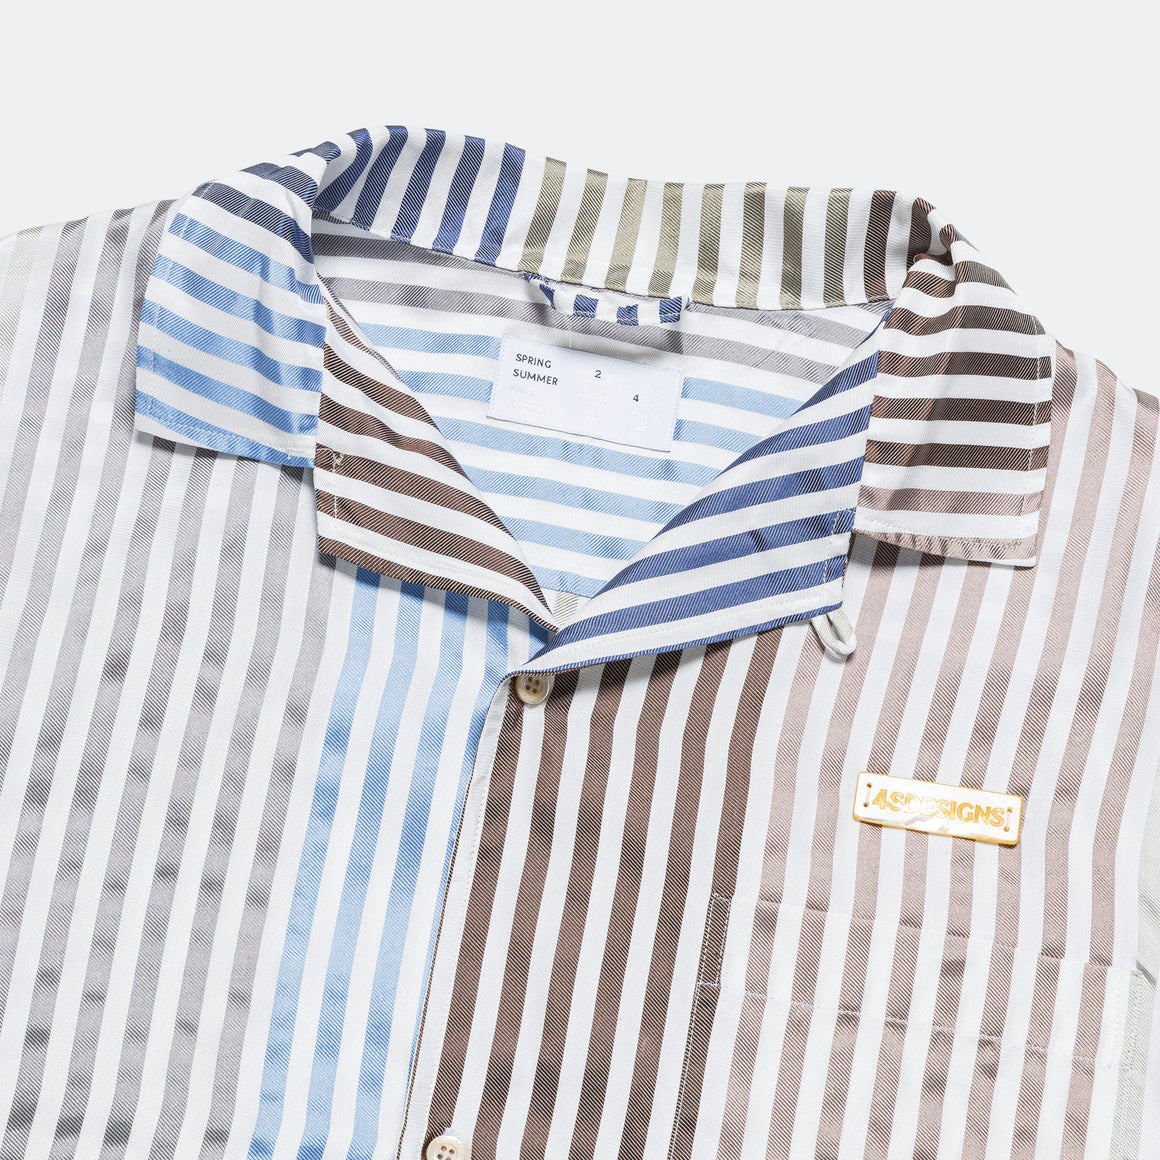 4SDesigns - Wide Camp Shirt - Multi Stripe All Silk SM Faille - UP THERE